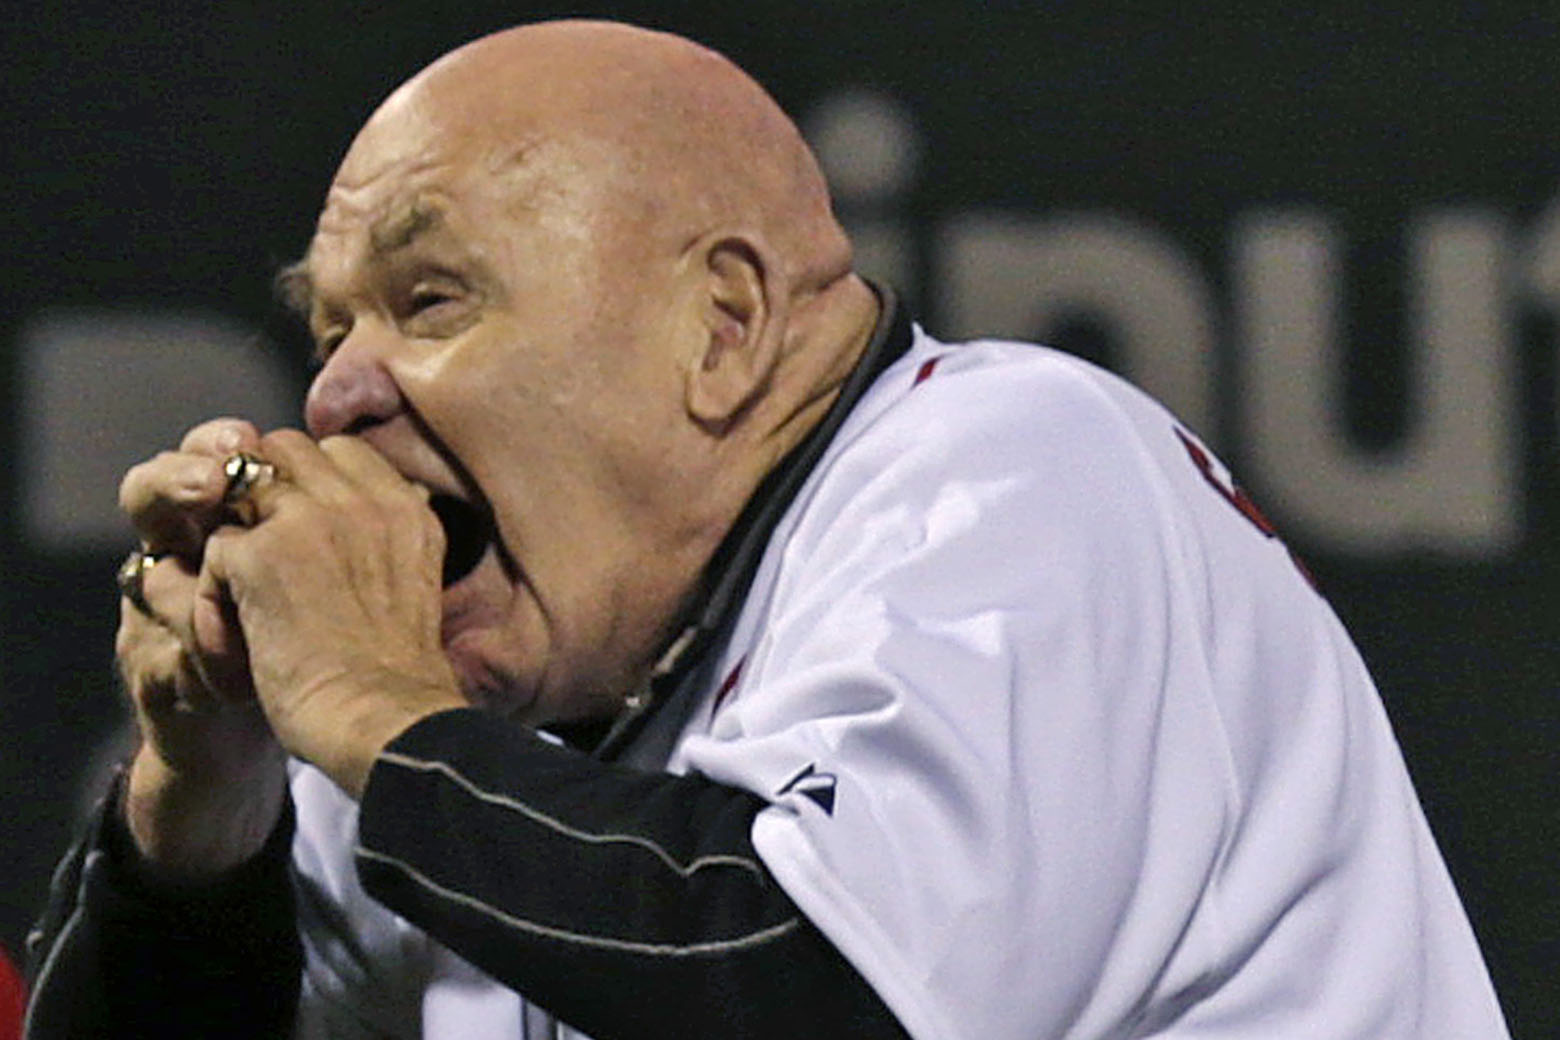 Former professional wrestler George "The Animal" Steele bites the baseball before throwing out the ceremonial first pitch prior to a baseball game against the Baltimore Orioles at Fenway Park in Boston, Friday, Sept. 21, 2012. (AP Photo/Charles Krupa)